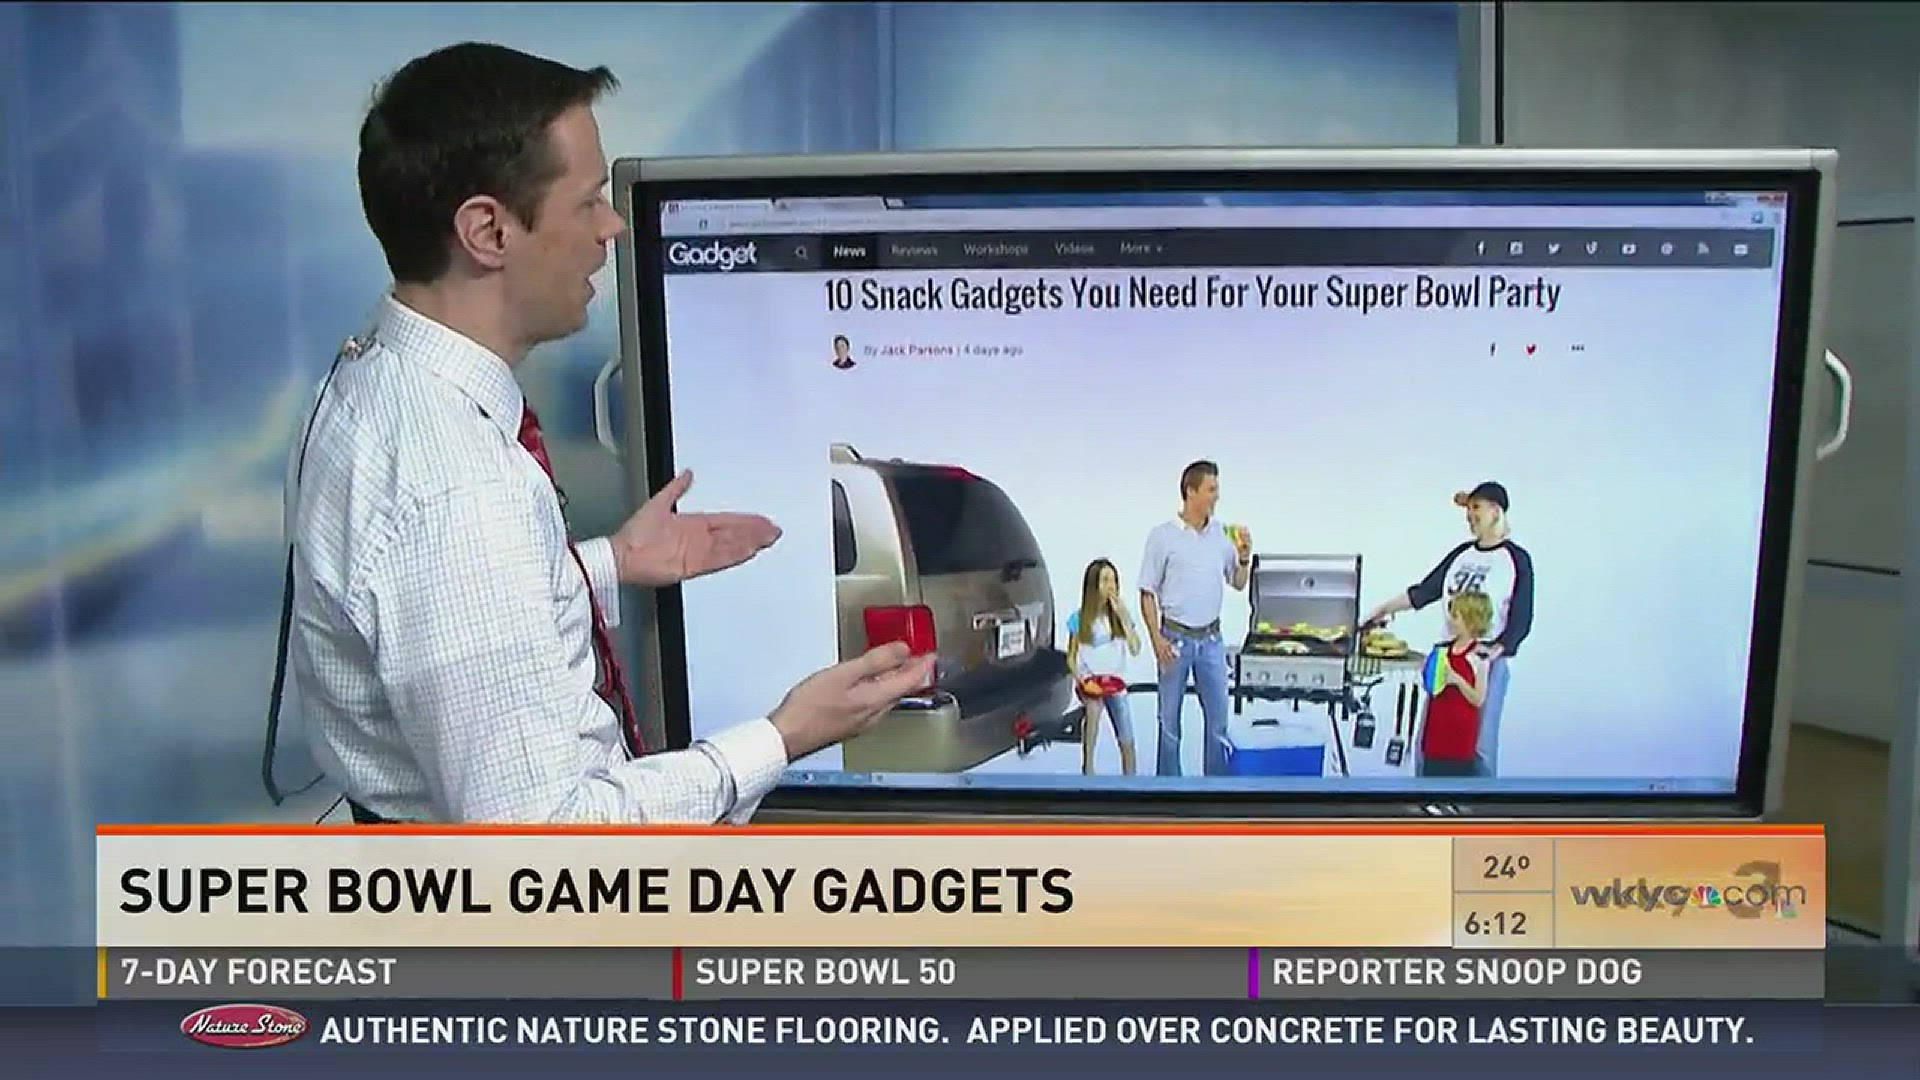 Feb. 5, 2016: Looking forward to Super Bowl Sunday, WKYC's Greg Dee gives a guide to tech items that will take your game day celebration to the next level. Want more? Be sure to follow @GregDeeWeather for loads more daily tech and weather updates.